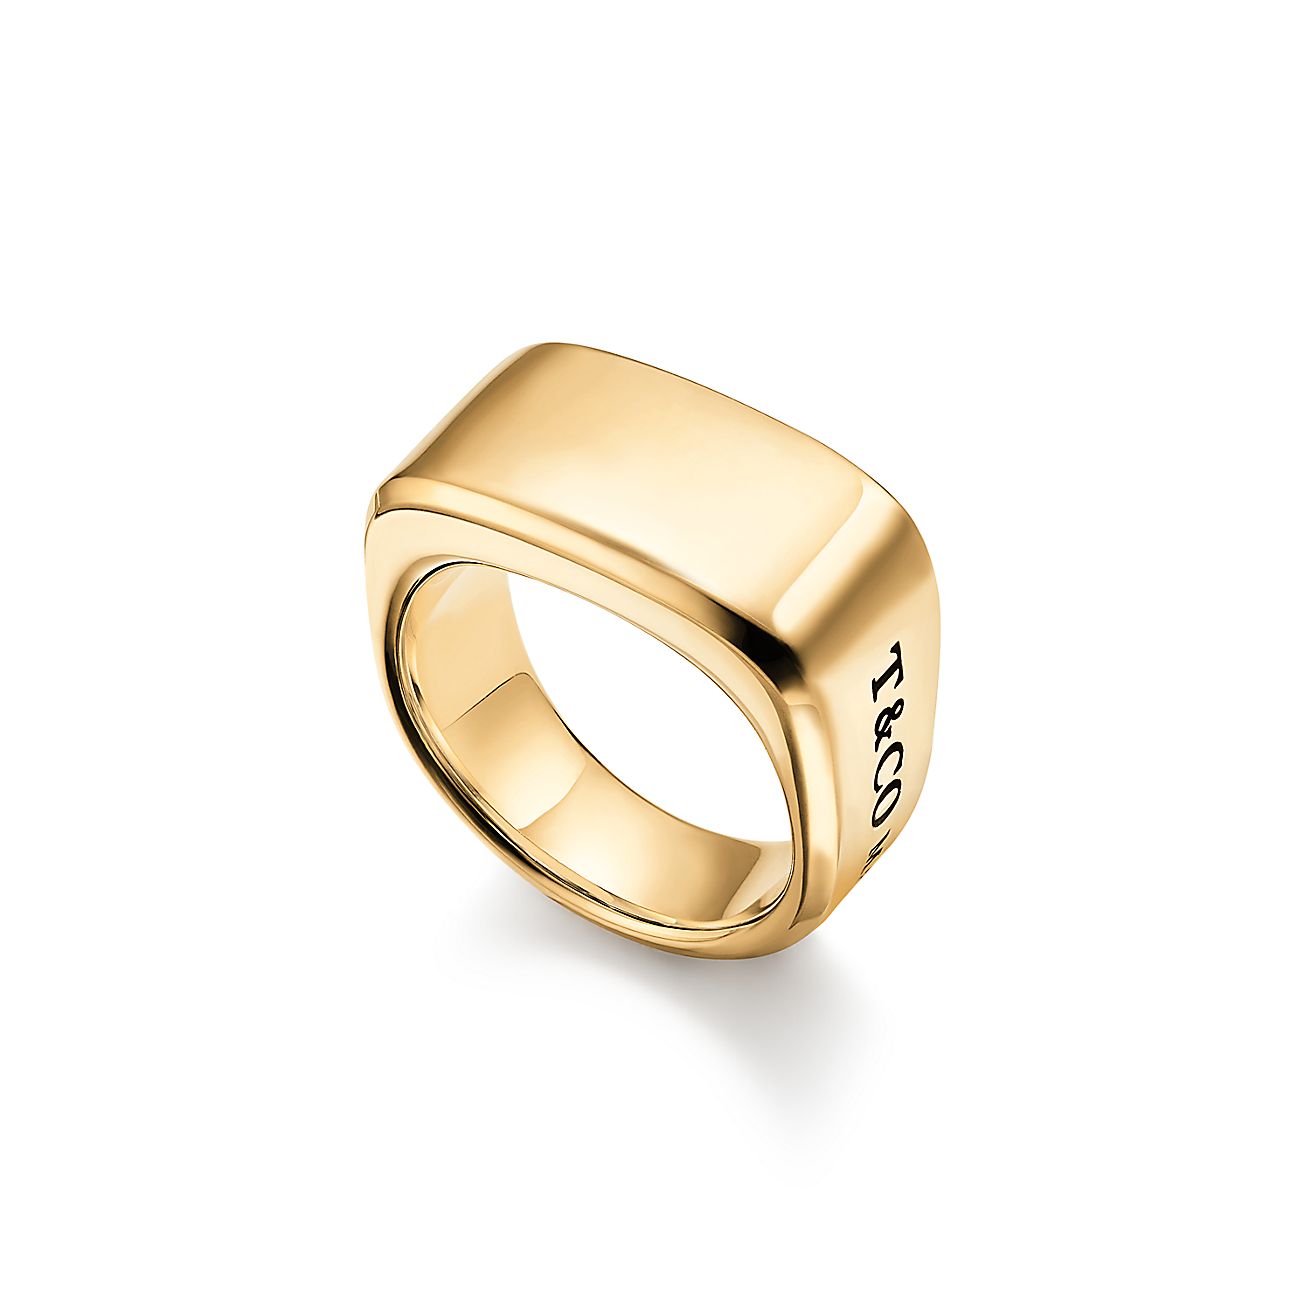 Tiffany 1837® Makers signet ring in 18k gold, 12 mm wide. | Tiffany ...